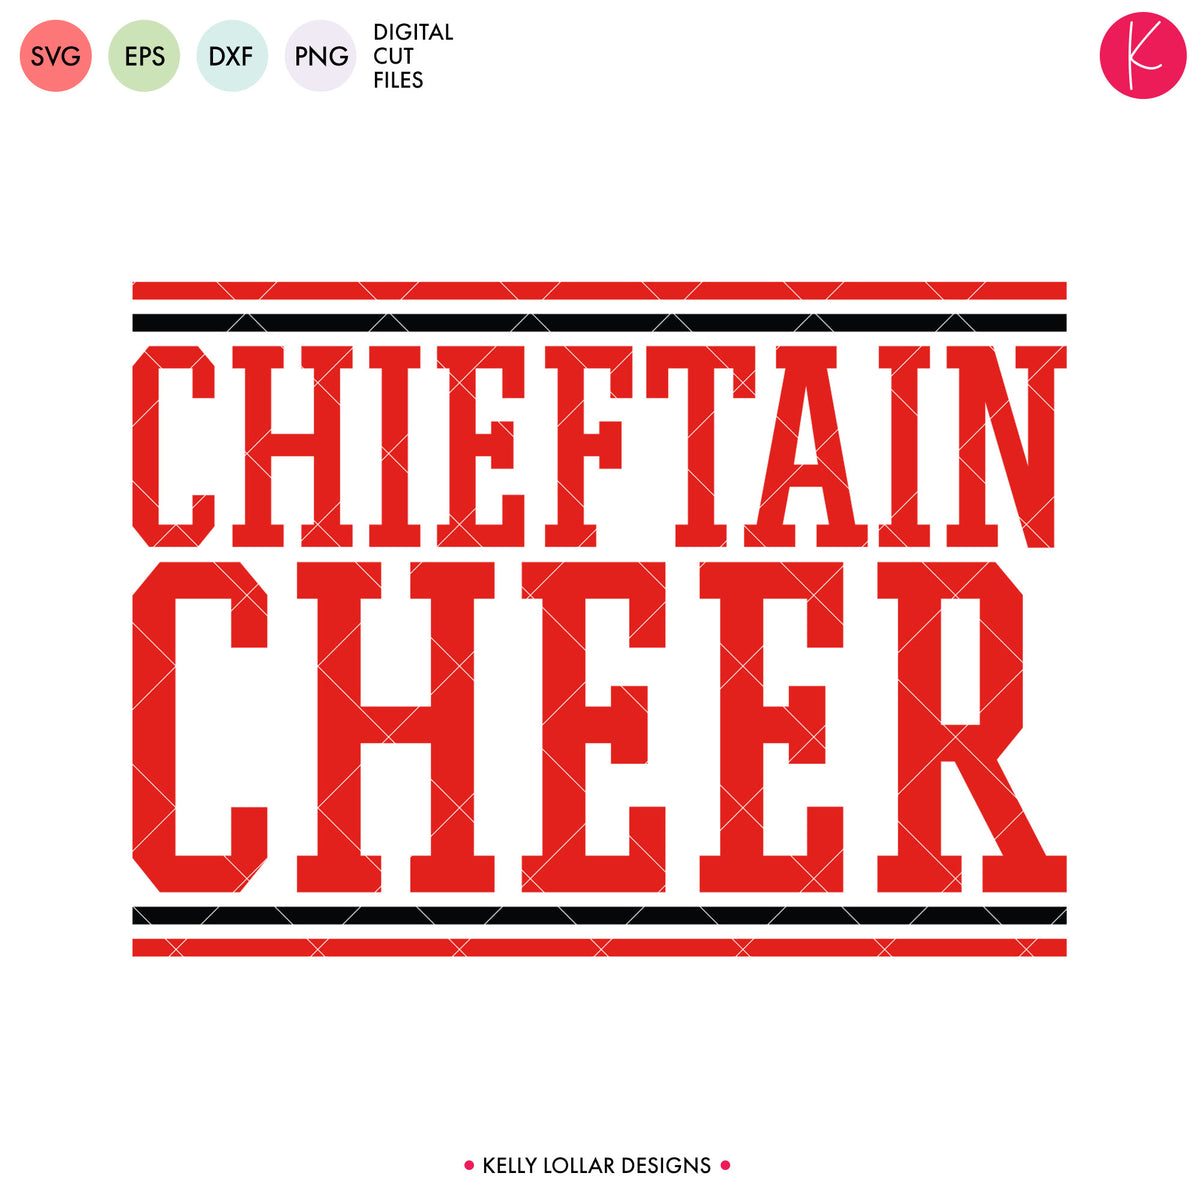 Chieftains Cheer Bundle | SVG DXF EPS PNG Cut Files